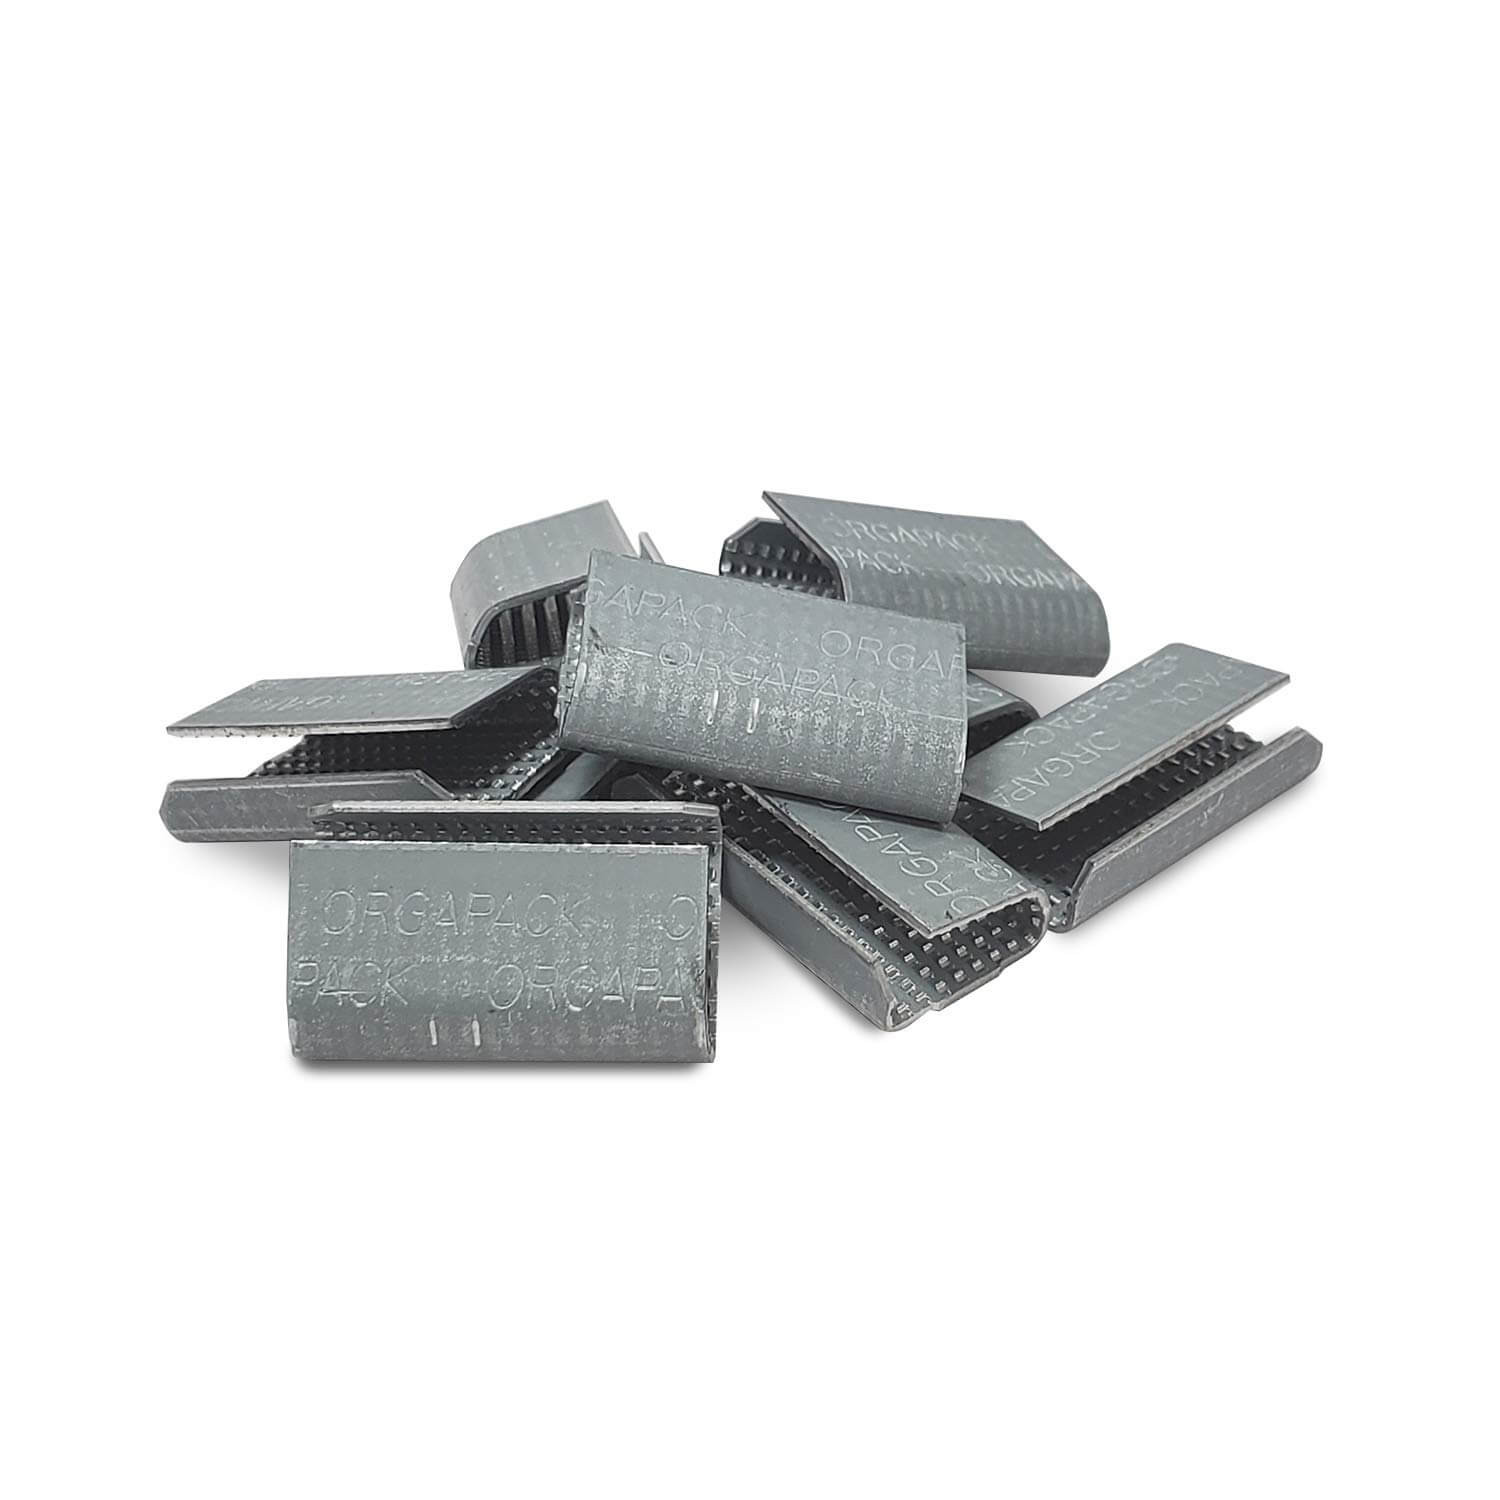 U.S. Solid 200pcs Packaging Strapping Open Serrated Seals for 5/8 Strap Width Polyester (PET) Strapping, Banding Strapping Clips Plastic Poly Strapping Metal